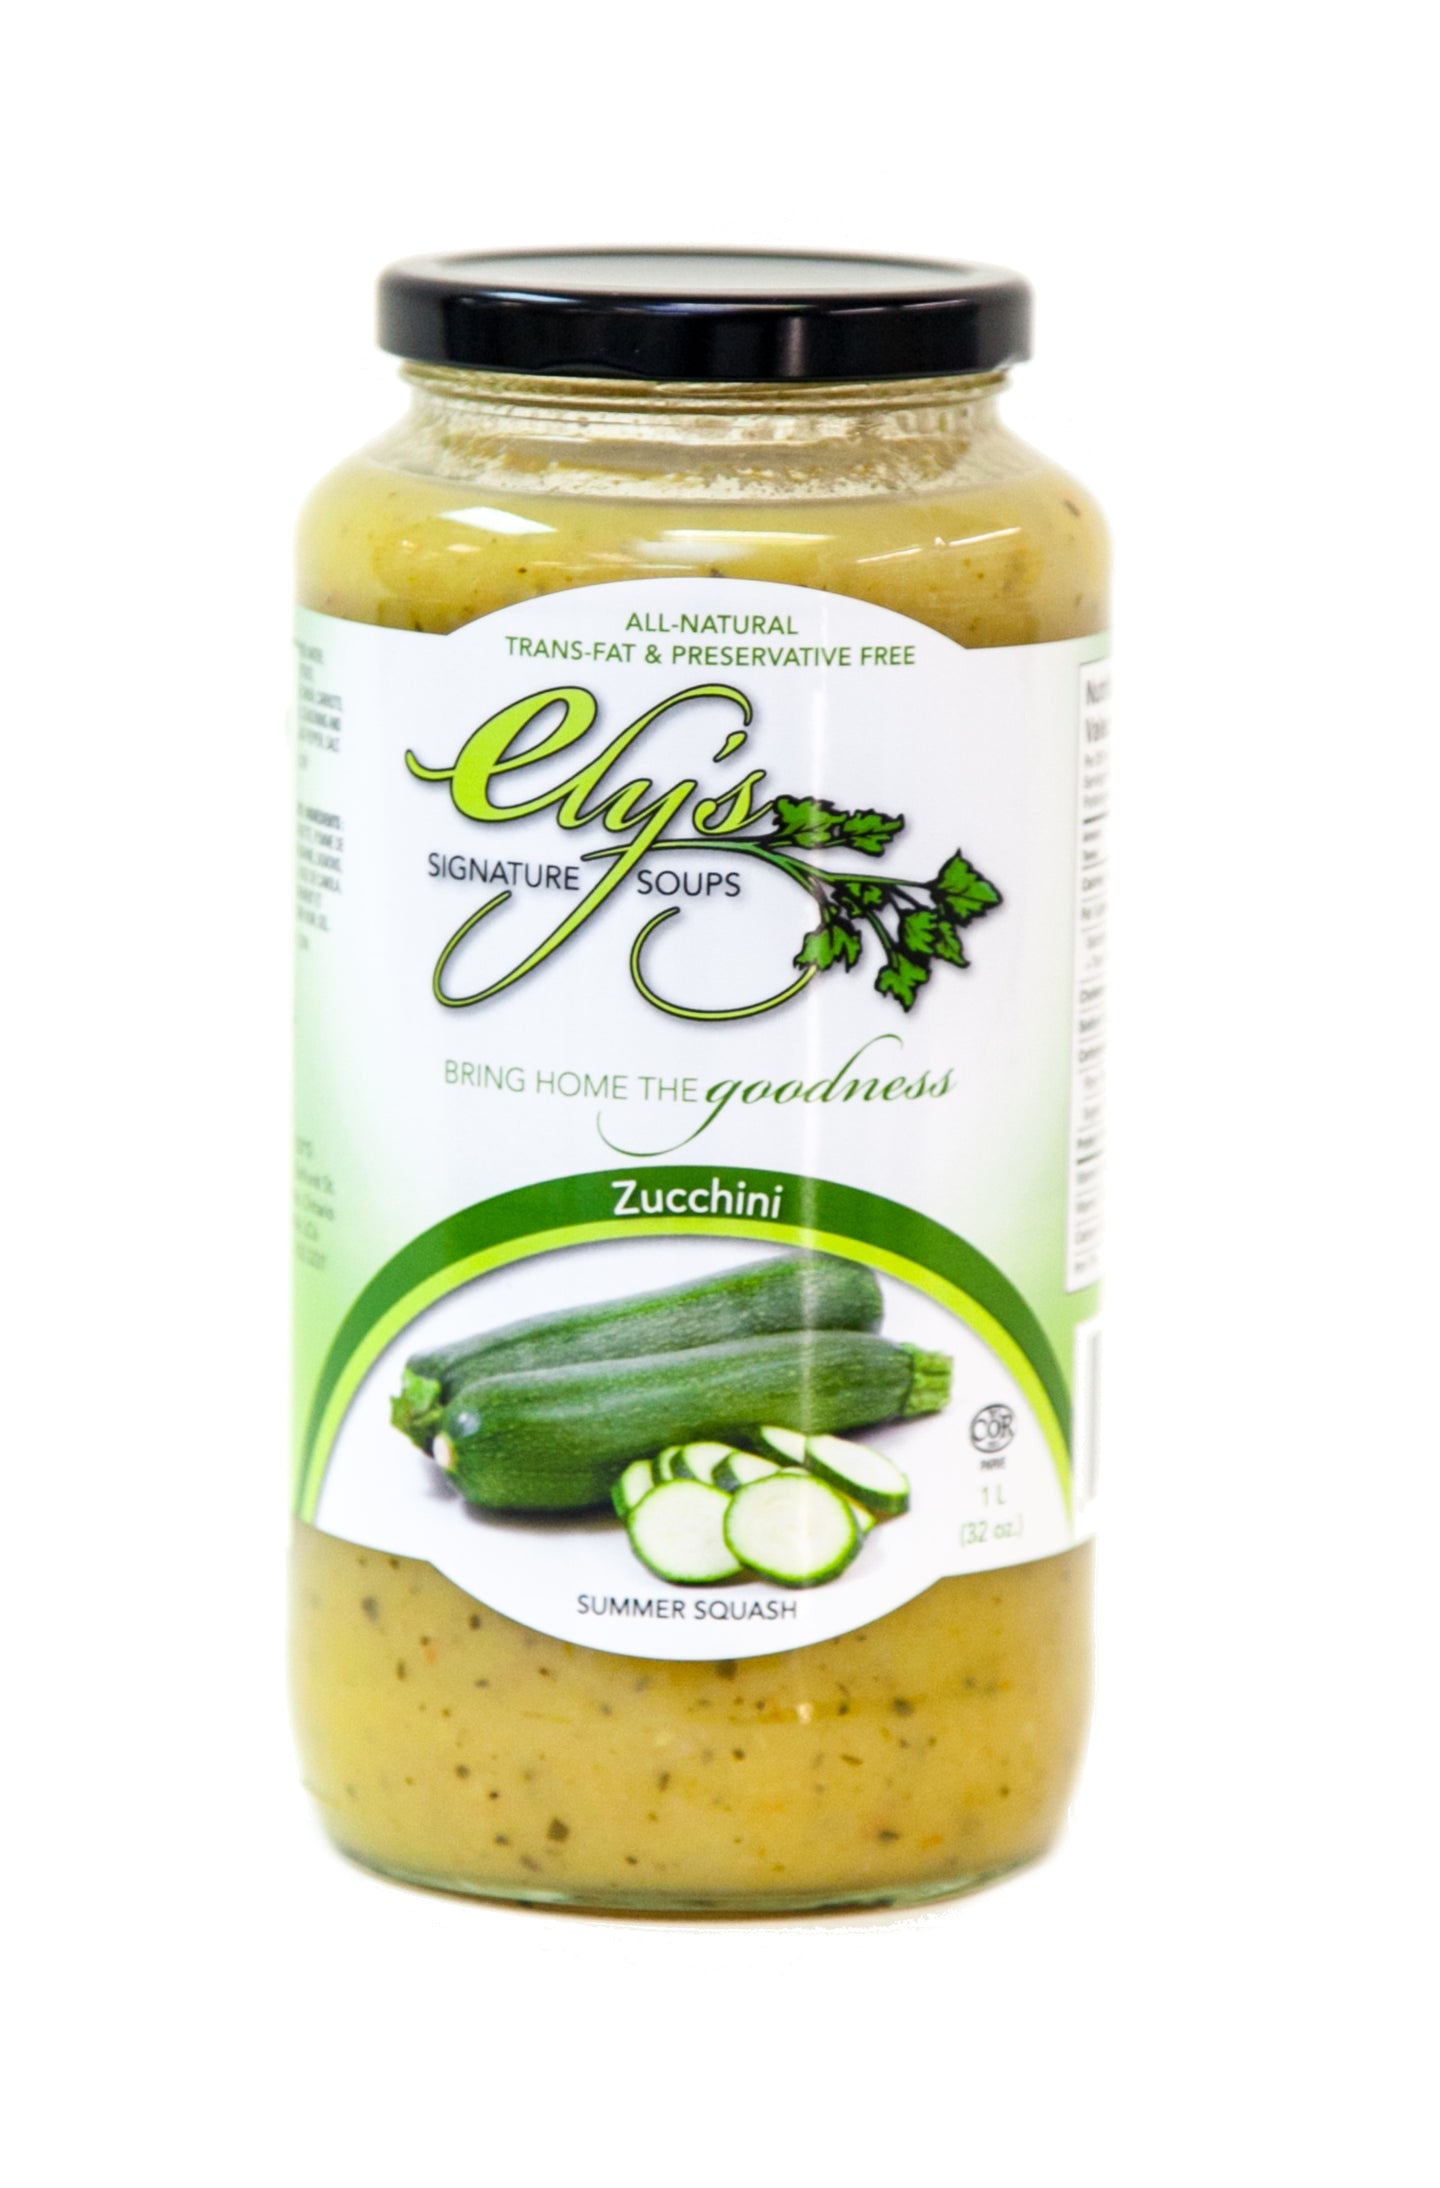 a jar of zucchini soup made by Ely's Fine Foods